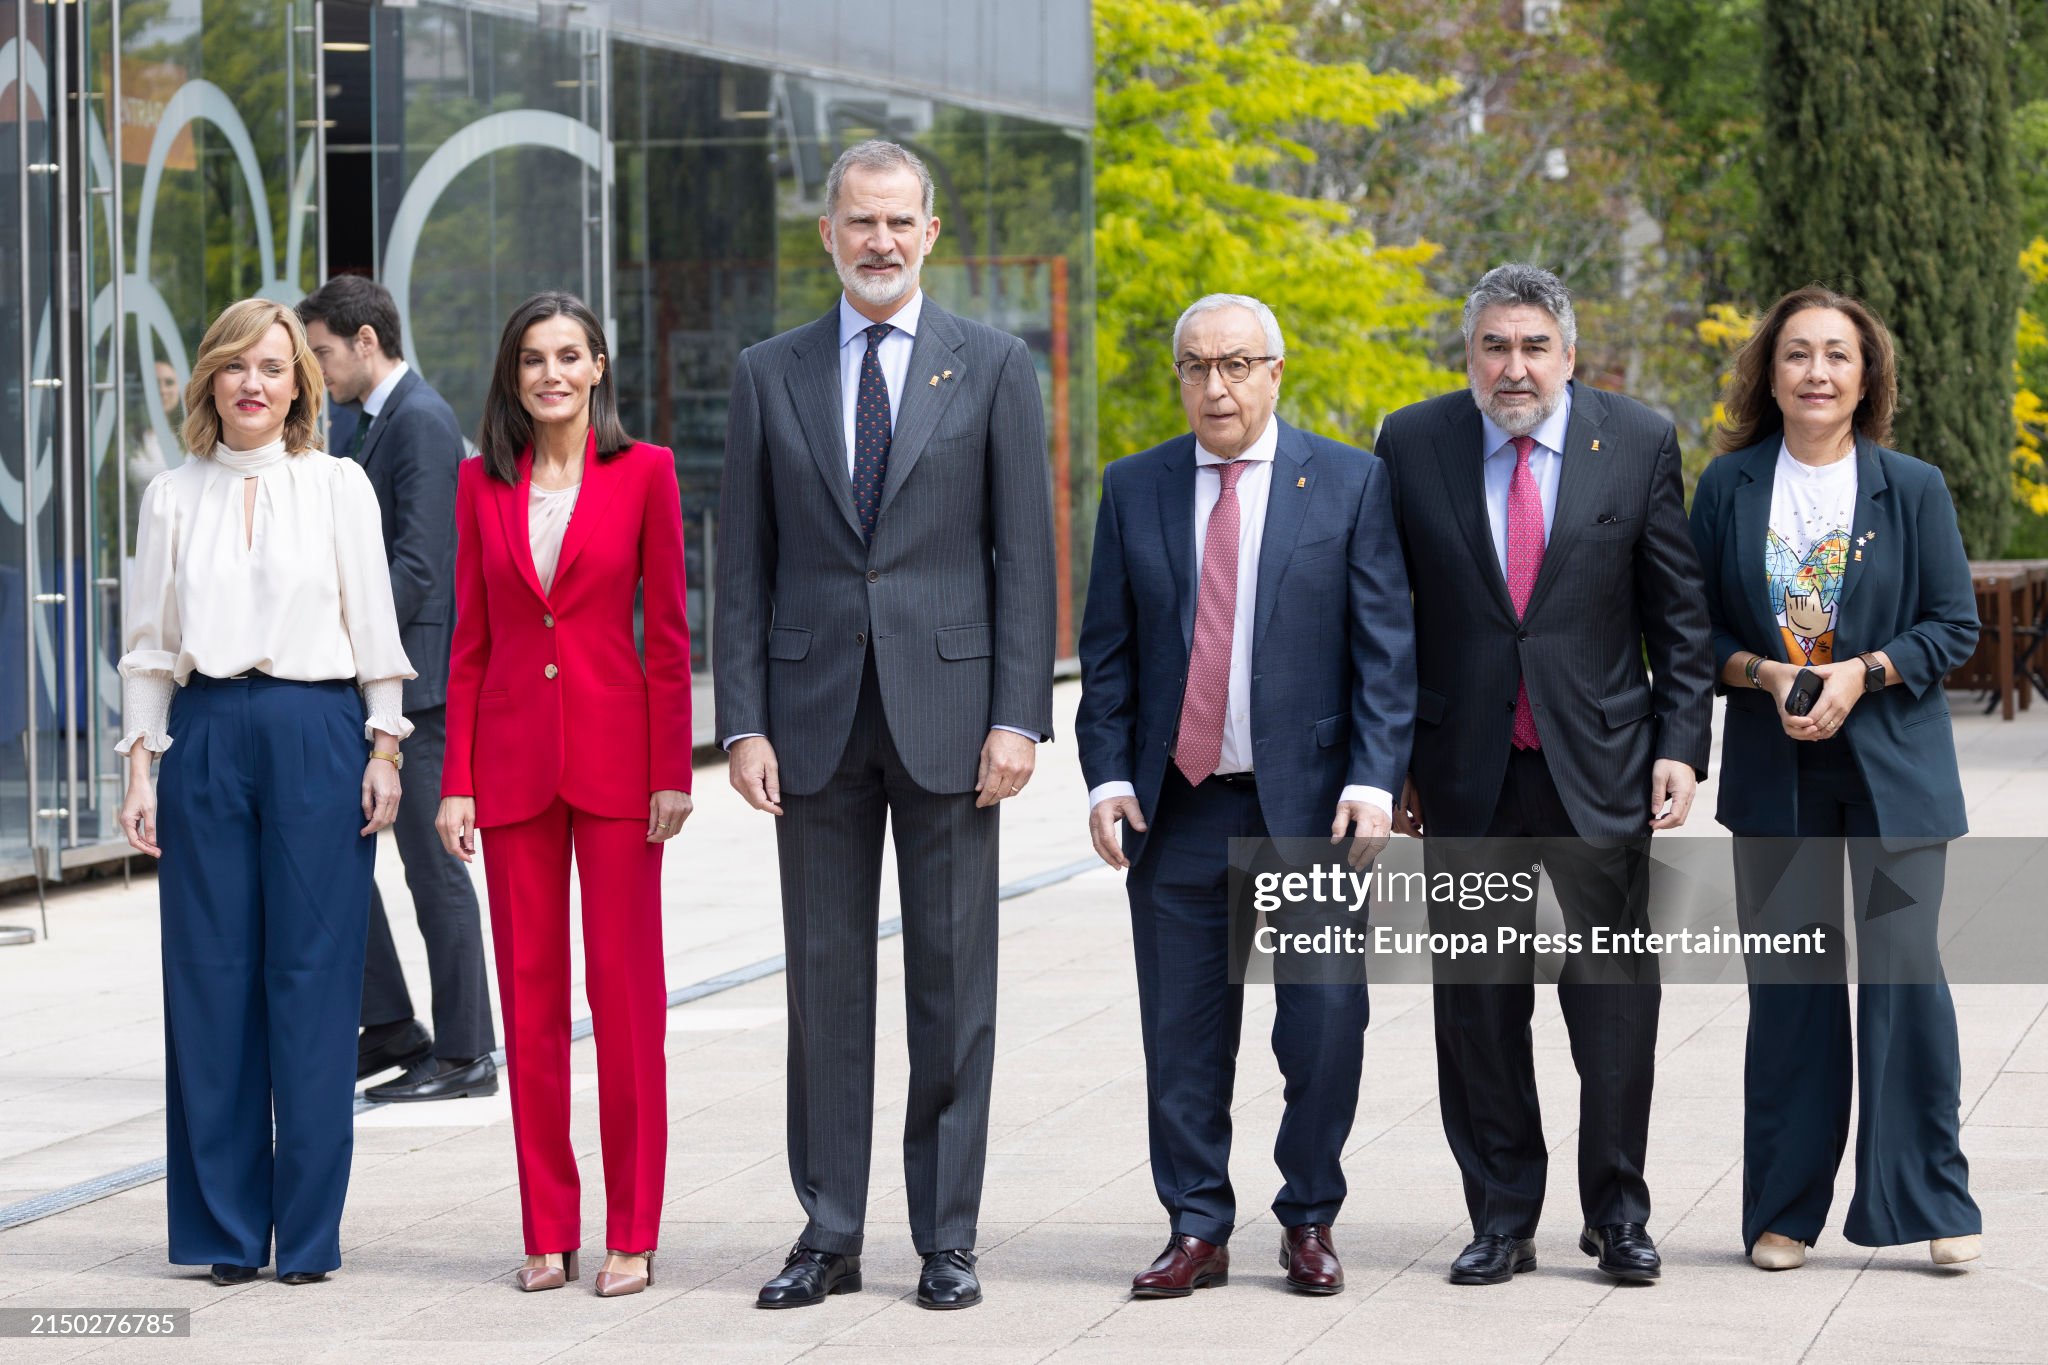 the-king-and-queen-of-spain-preside-over-the-ceremony-commemorating-the-spanish-teams.jpg?s=2048x2048&w=gi&k=20&c=YcQWBSjsBMS_l7tUwPBeQ3i050UZbZ1jf1eq0jVs4zo=